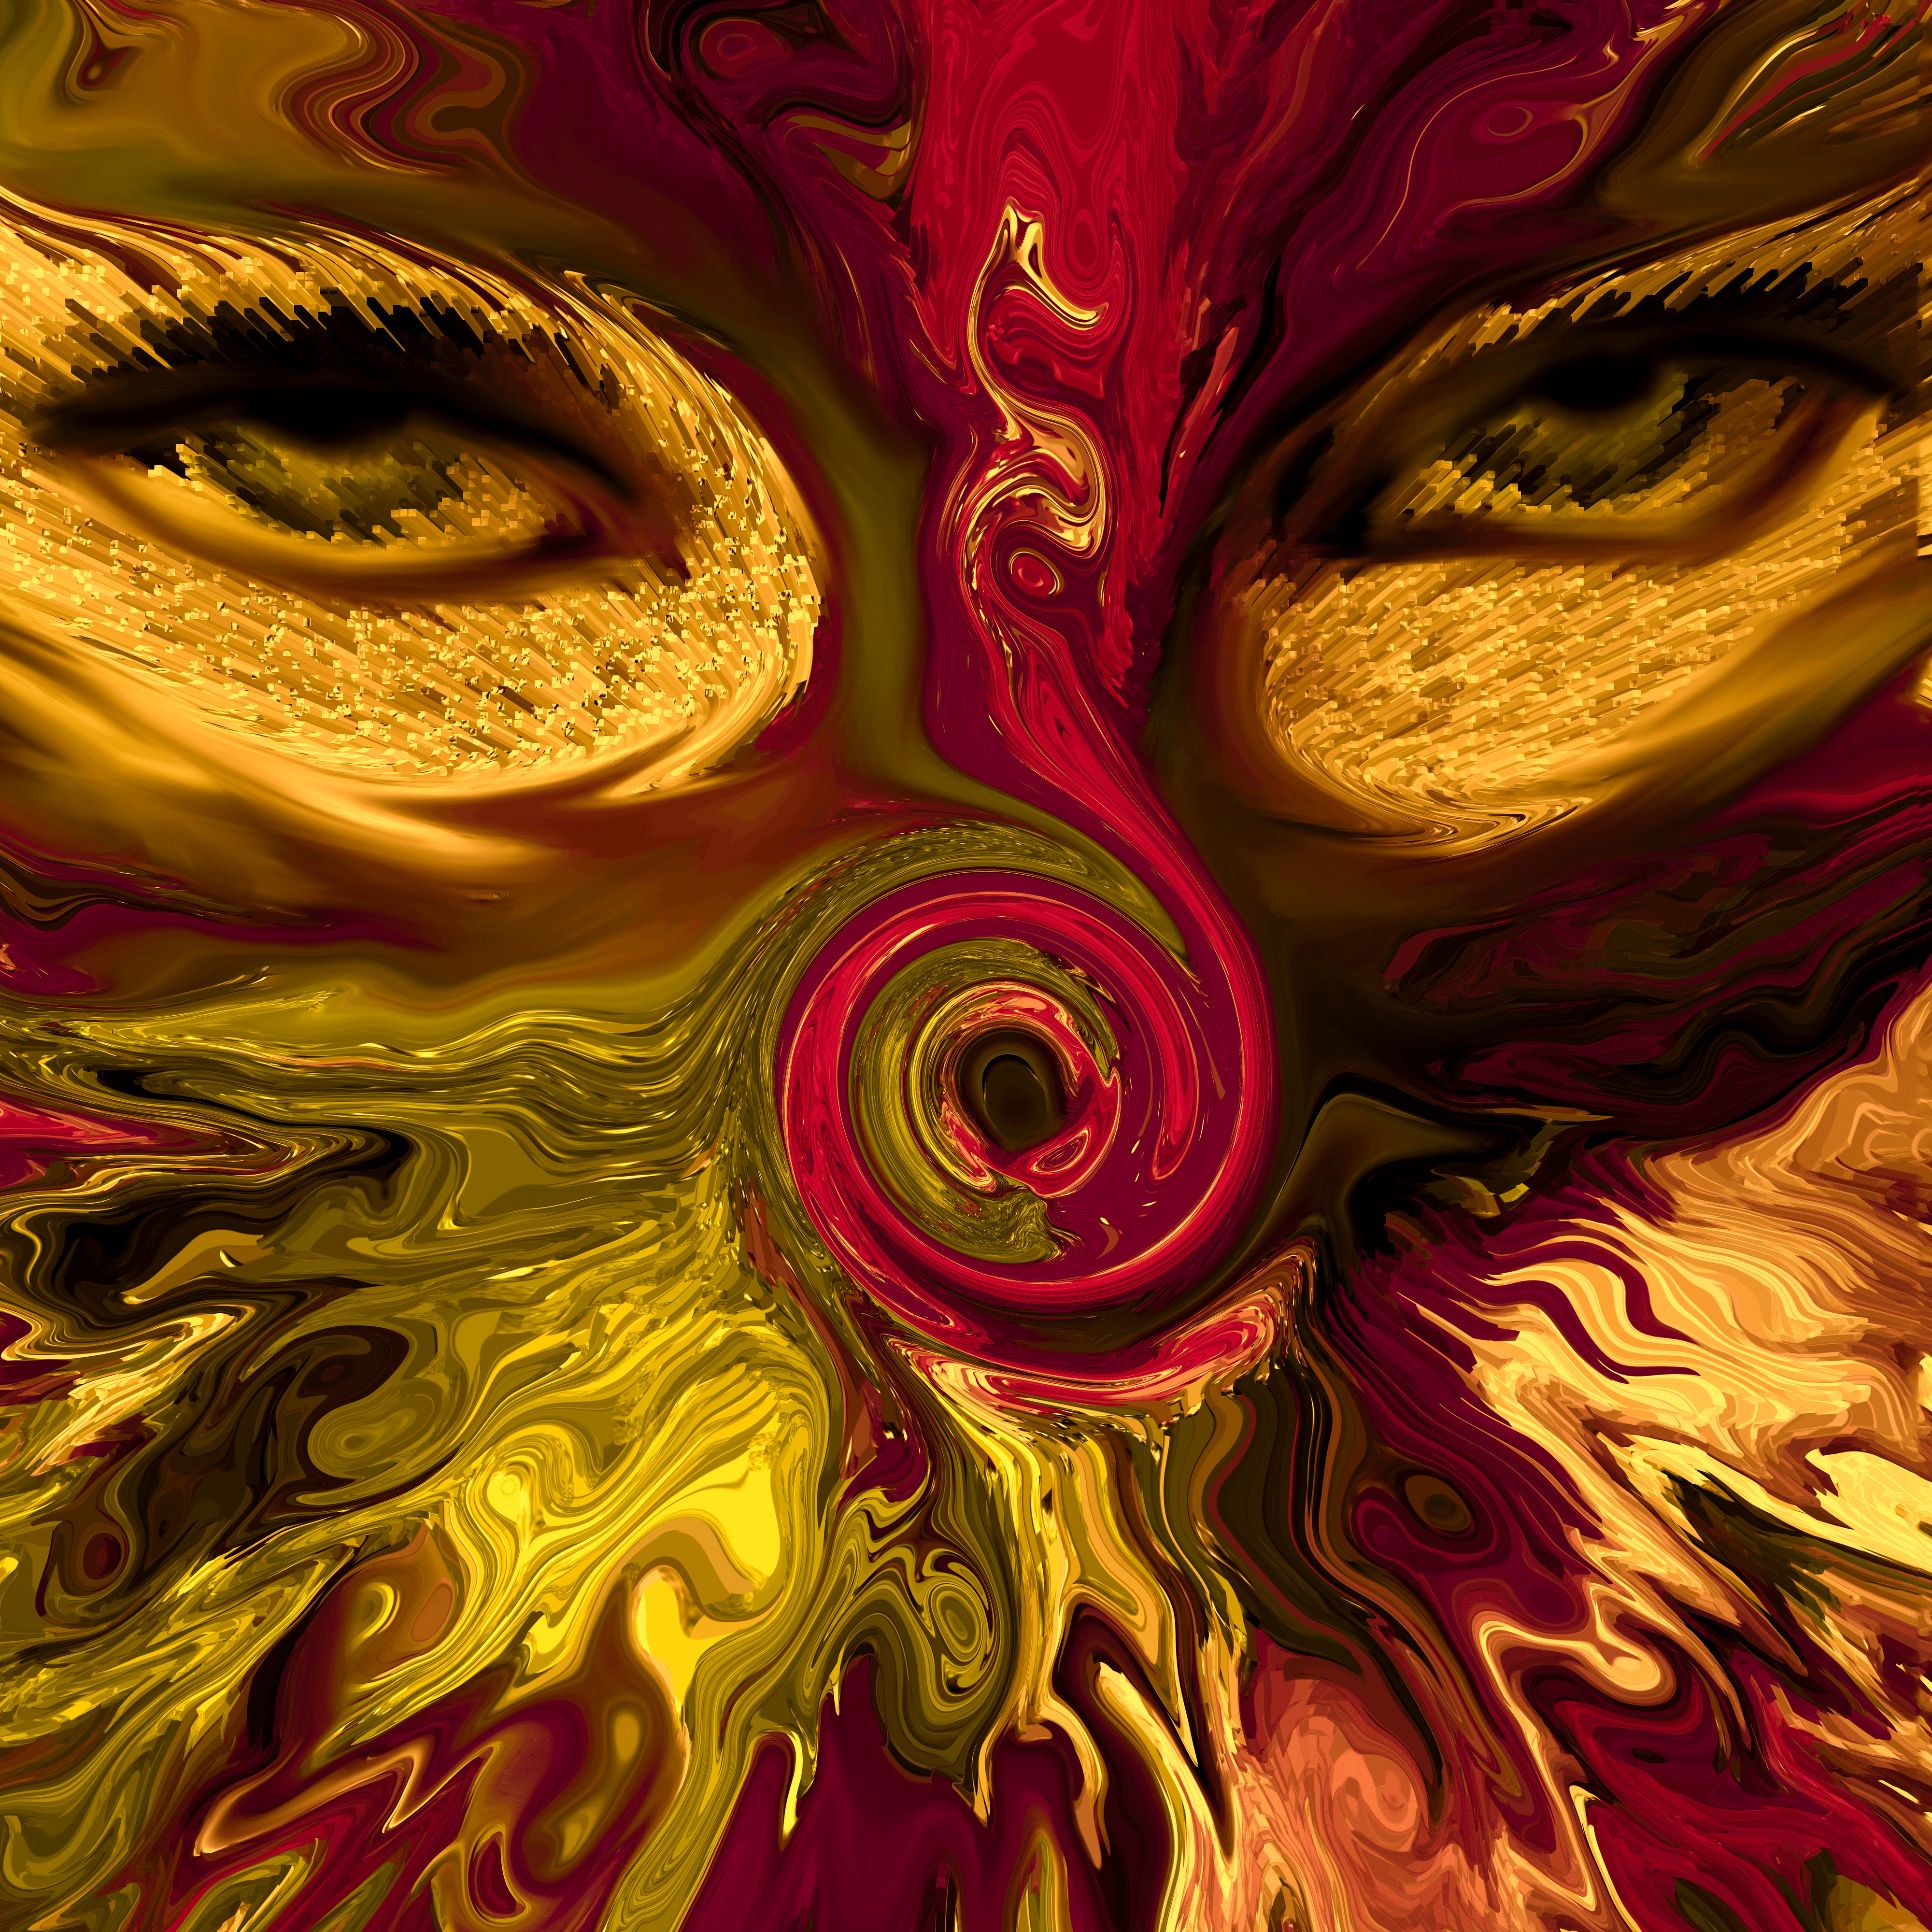 Woman with the Mask